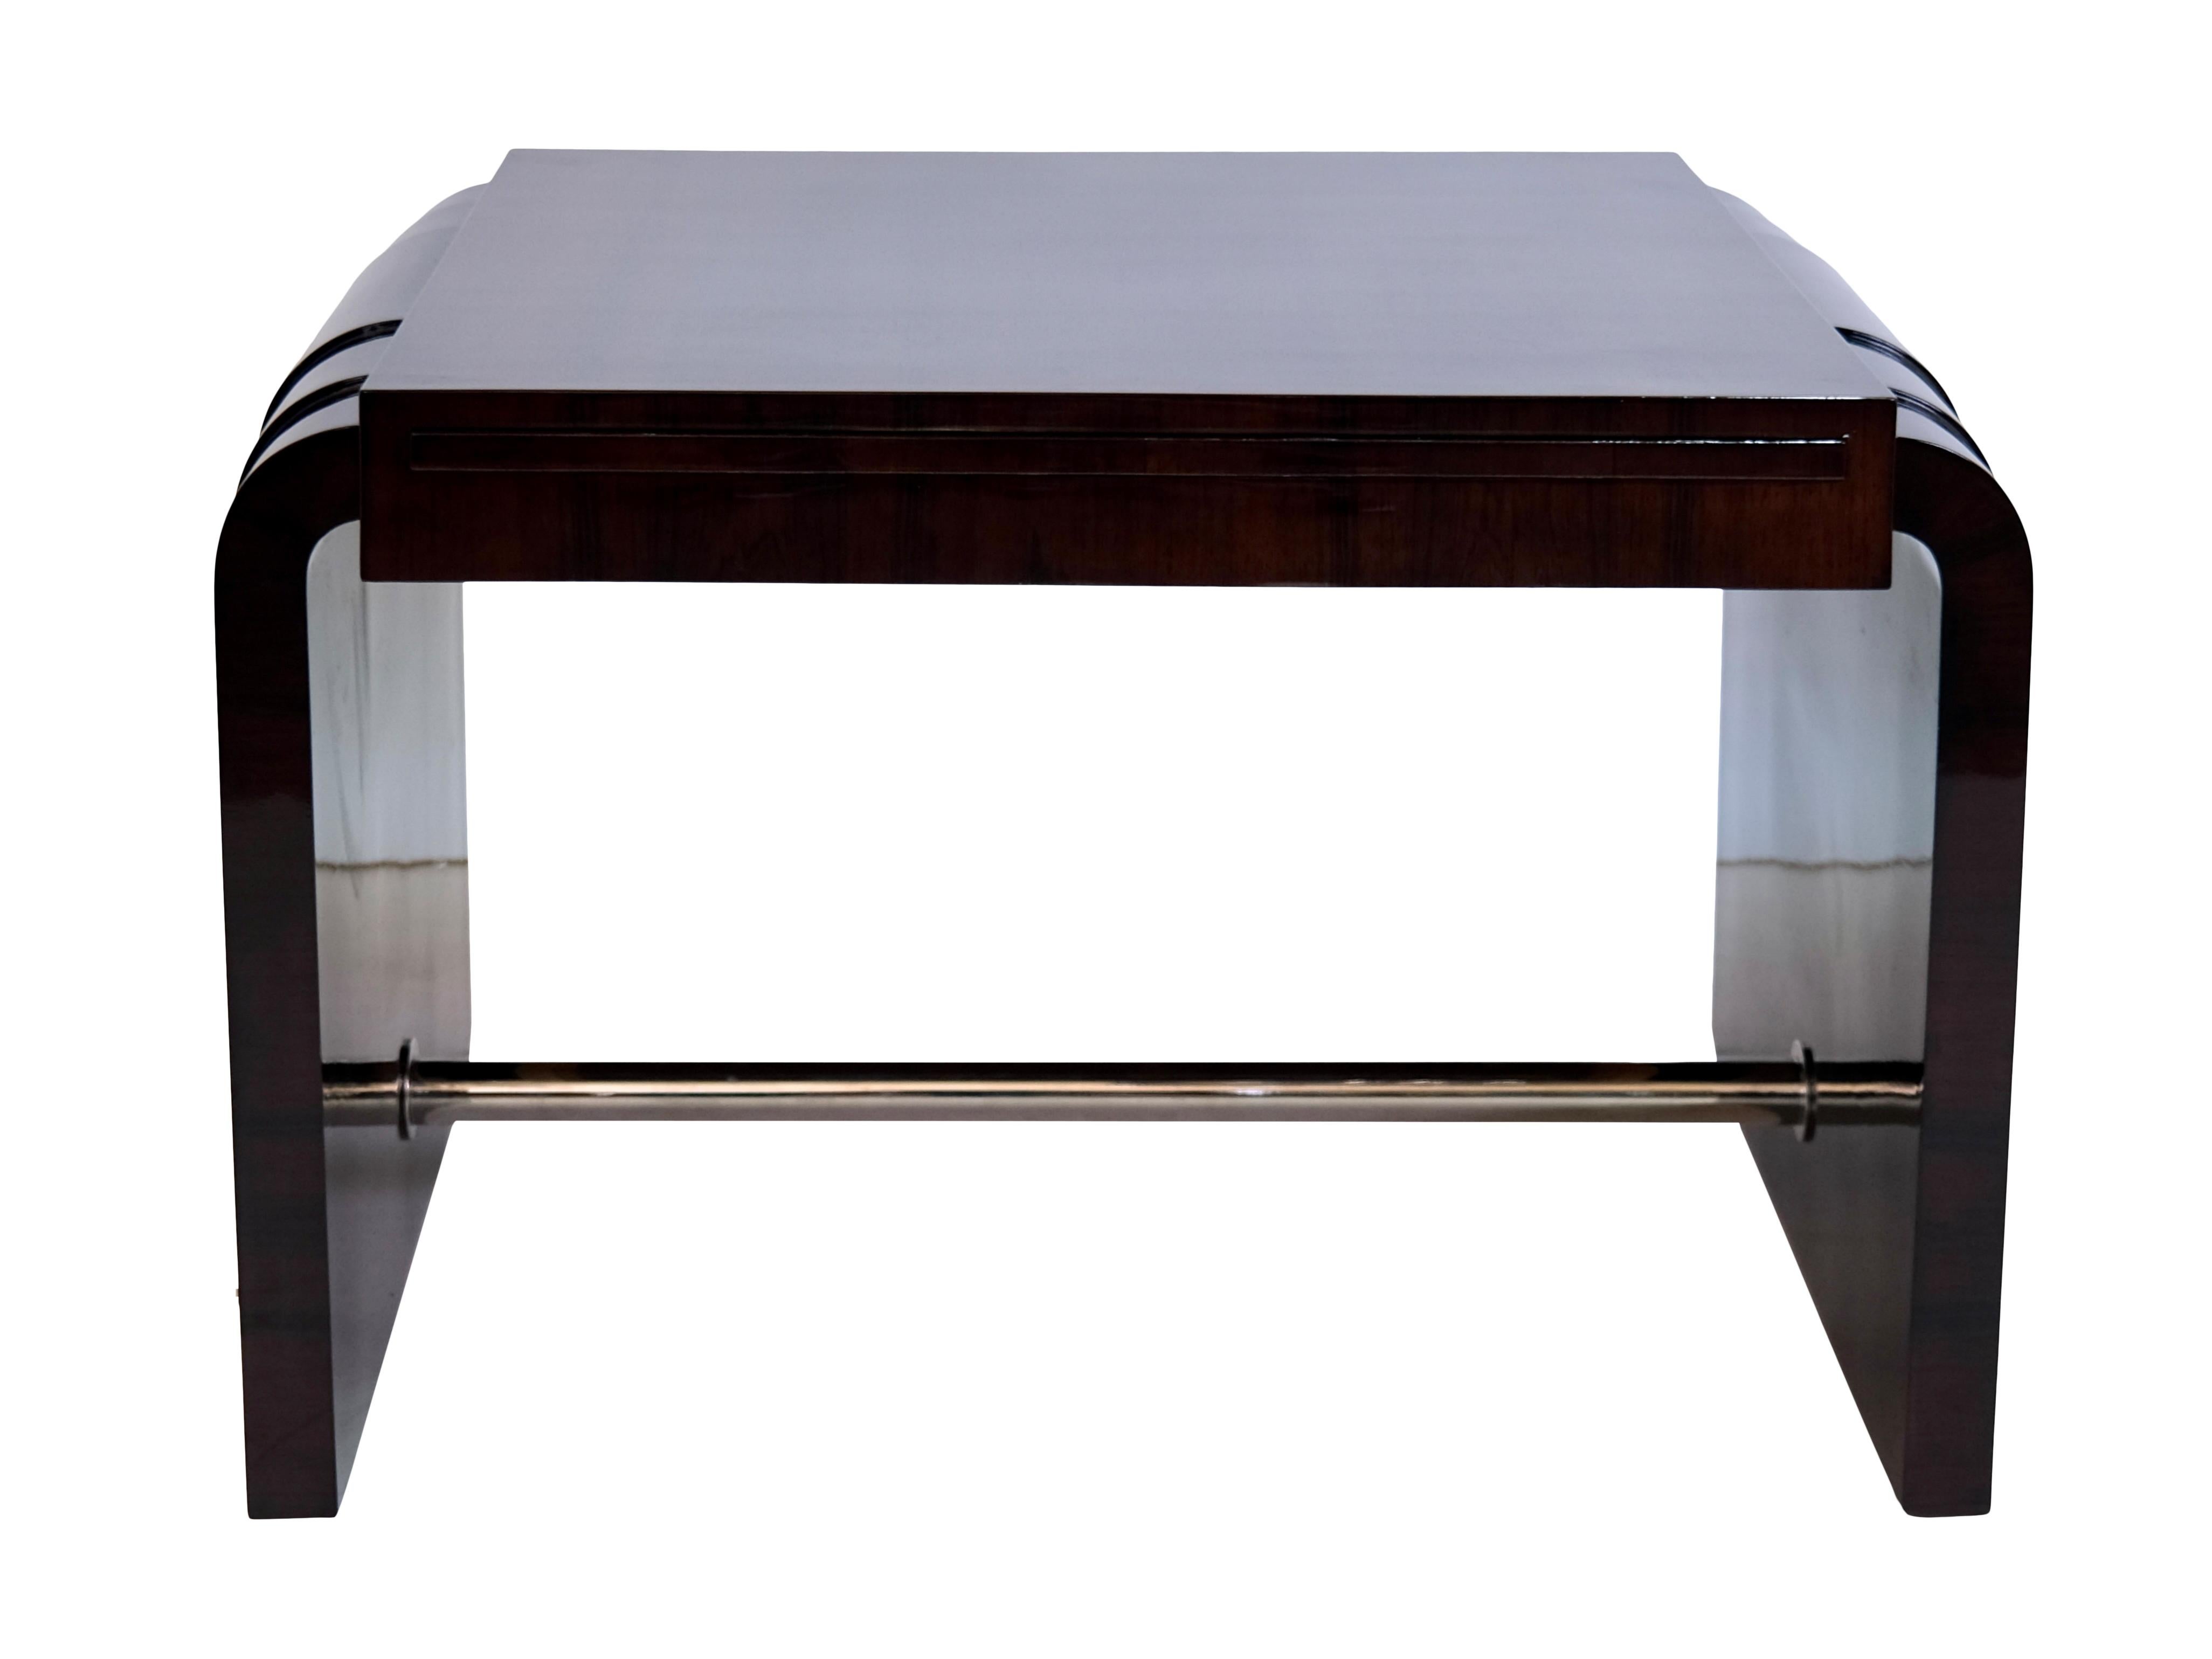 Lacquered French 1930s Art Deco Couch Table with Two Rounded Sides and Chromed Rod